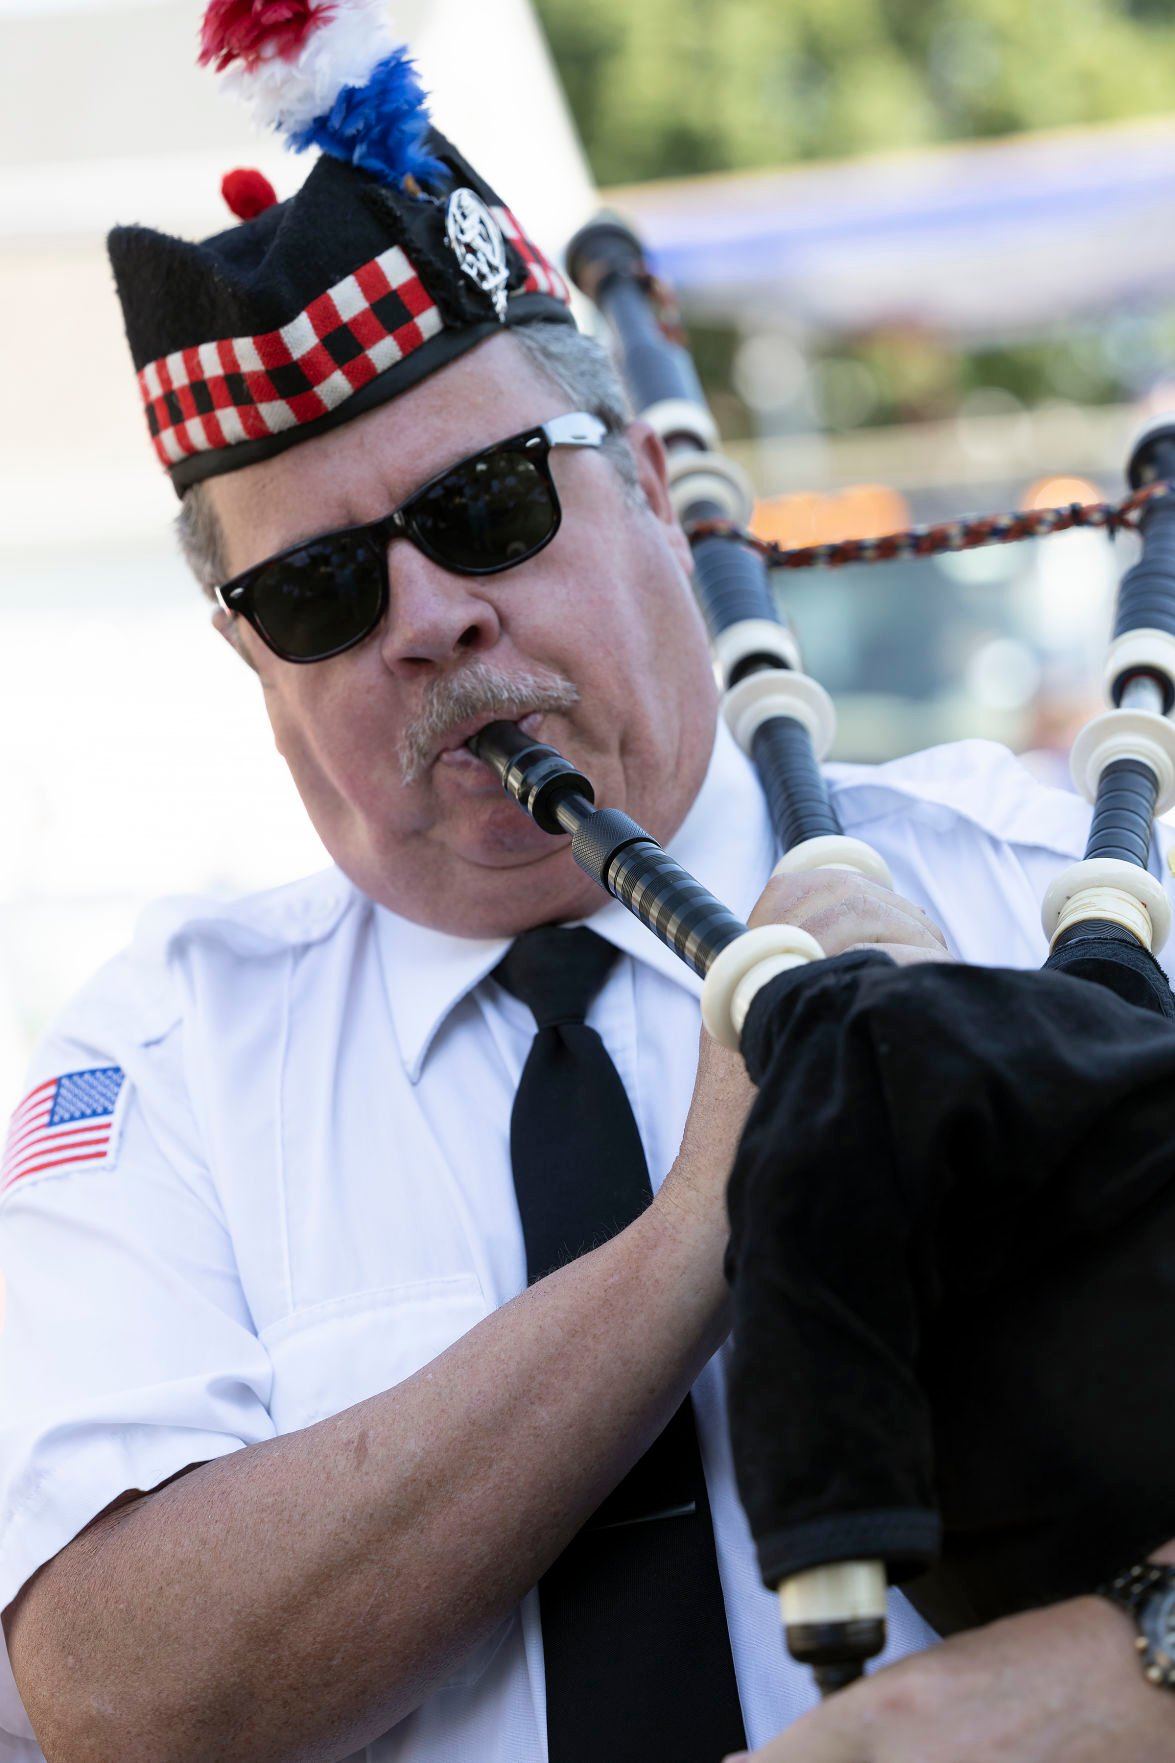 Bill Spivey learned how the play the bagpipes about 20 years ago. Today, he has a business and plays the instrument at events across the Midwest. He often is booked to play multiple events per week.    PHOTO CREDIT: Stephen Gassman